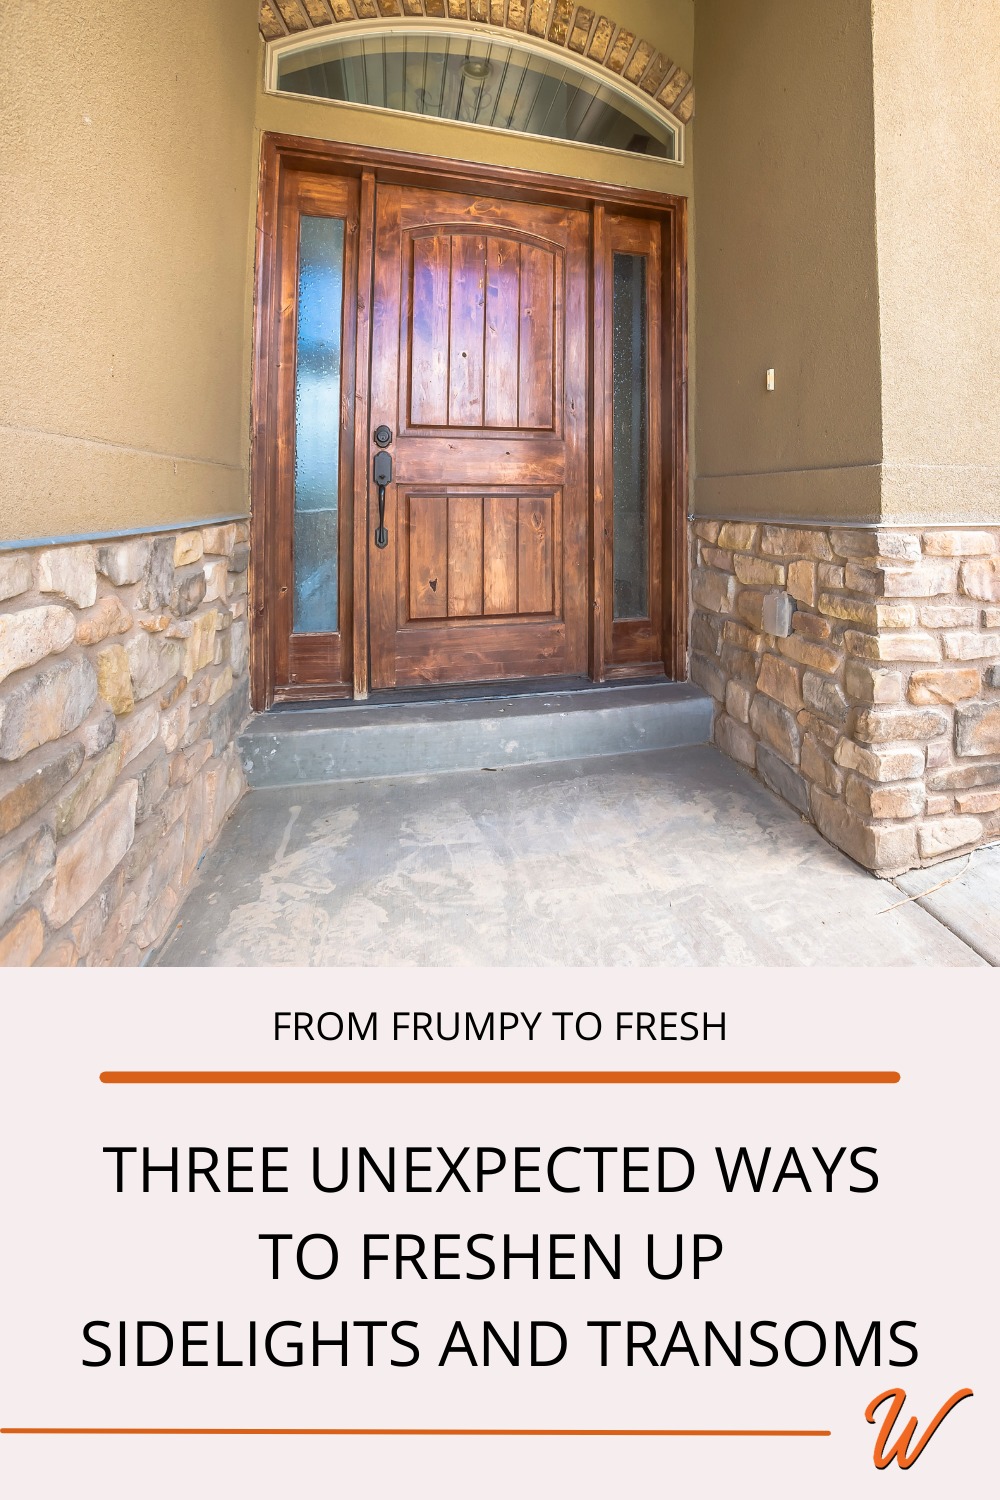 wood door with arched transom and sidelights captioned with "from frumpy to fresh: three unexpected ways to freshen up sidelights and transoms"